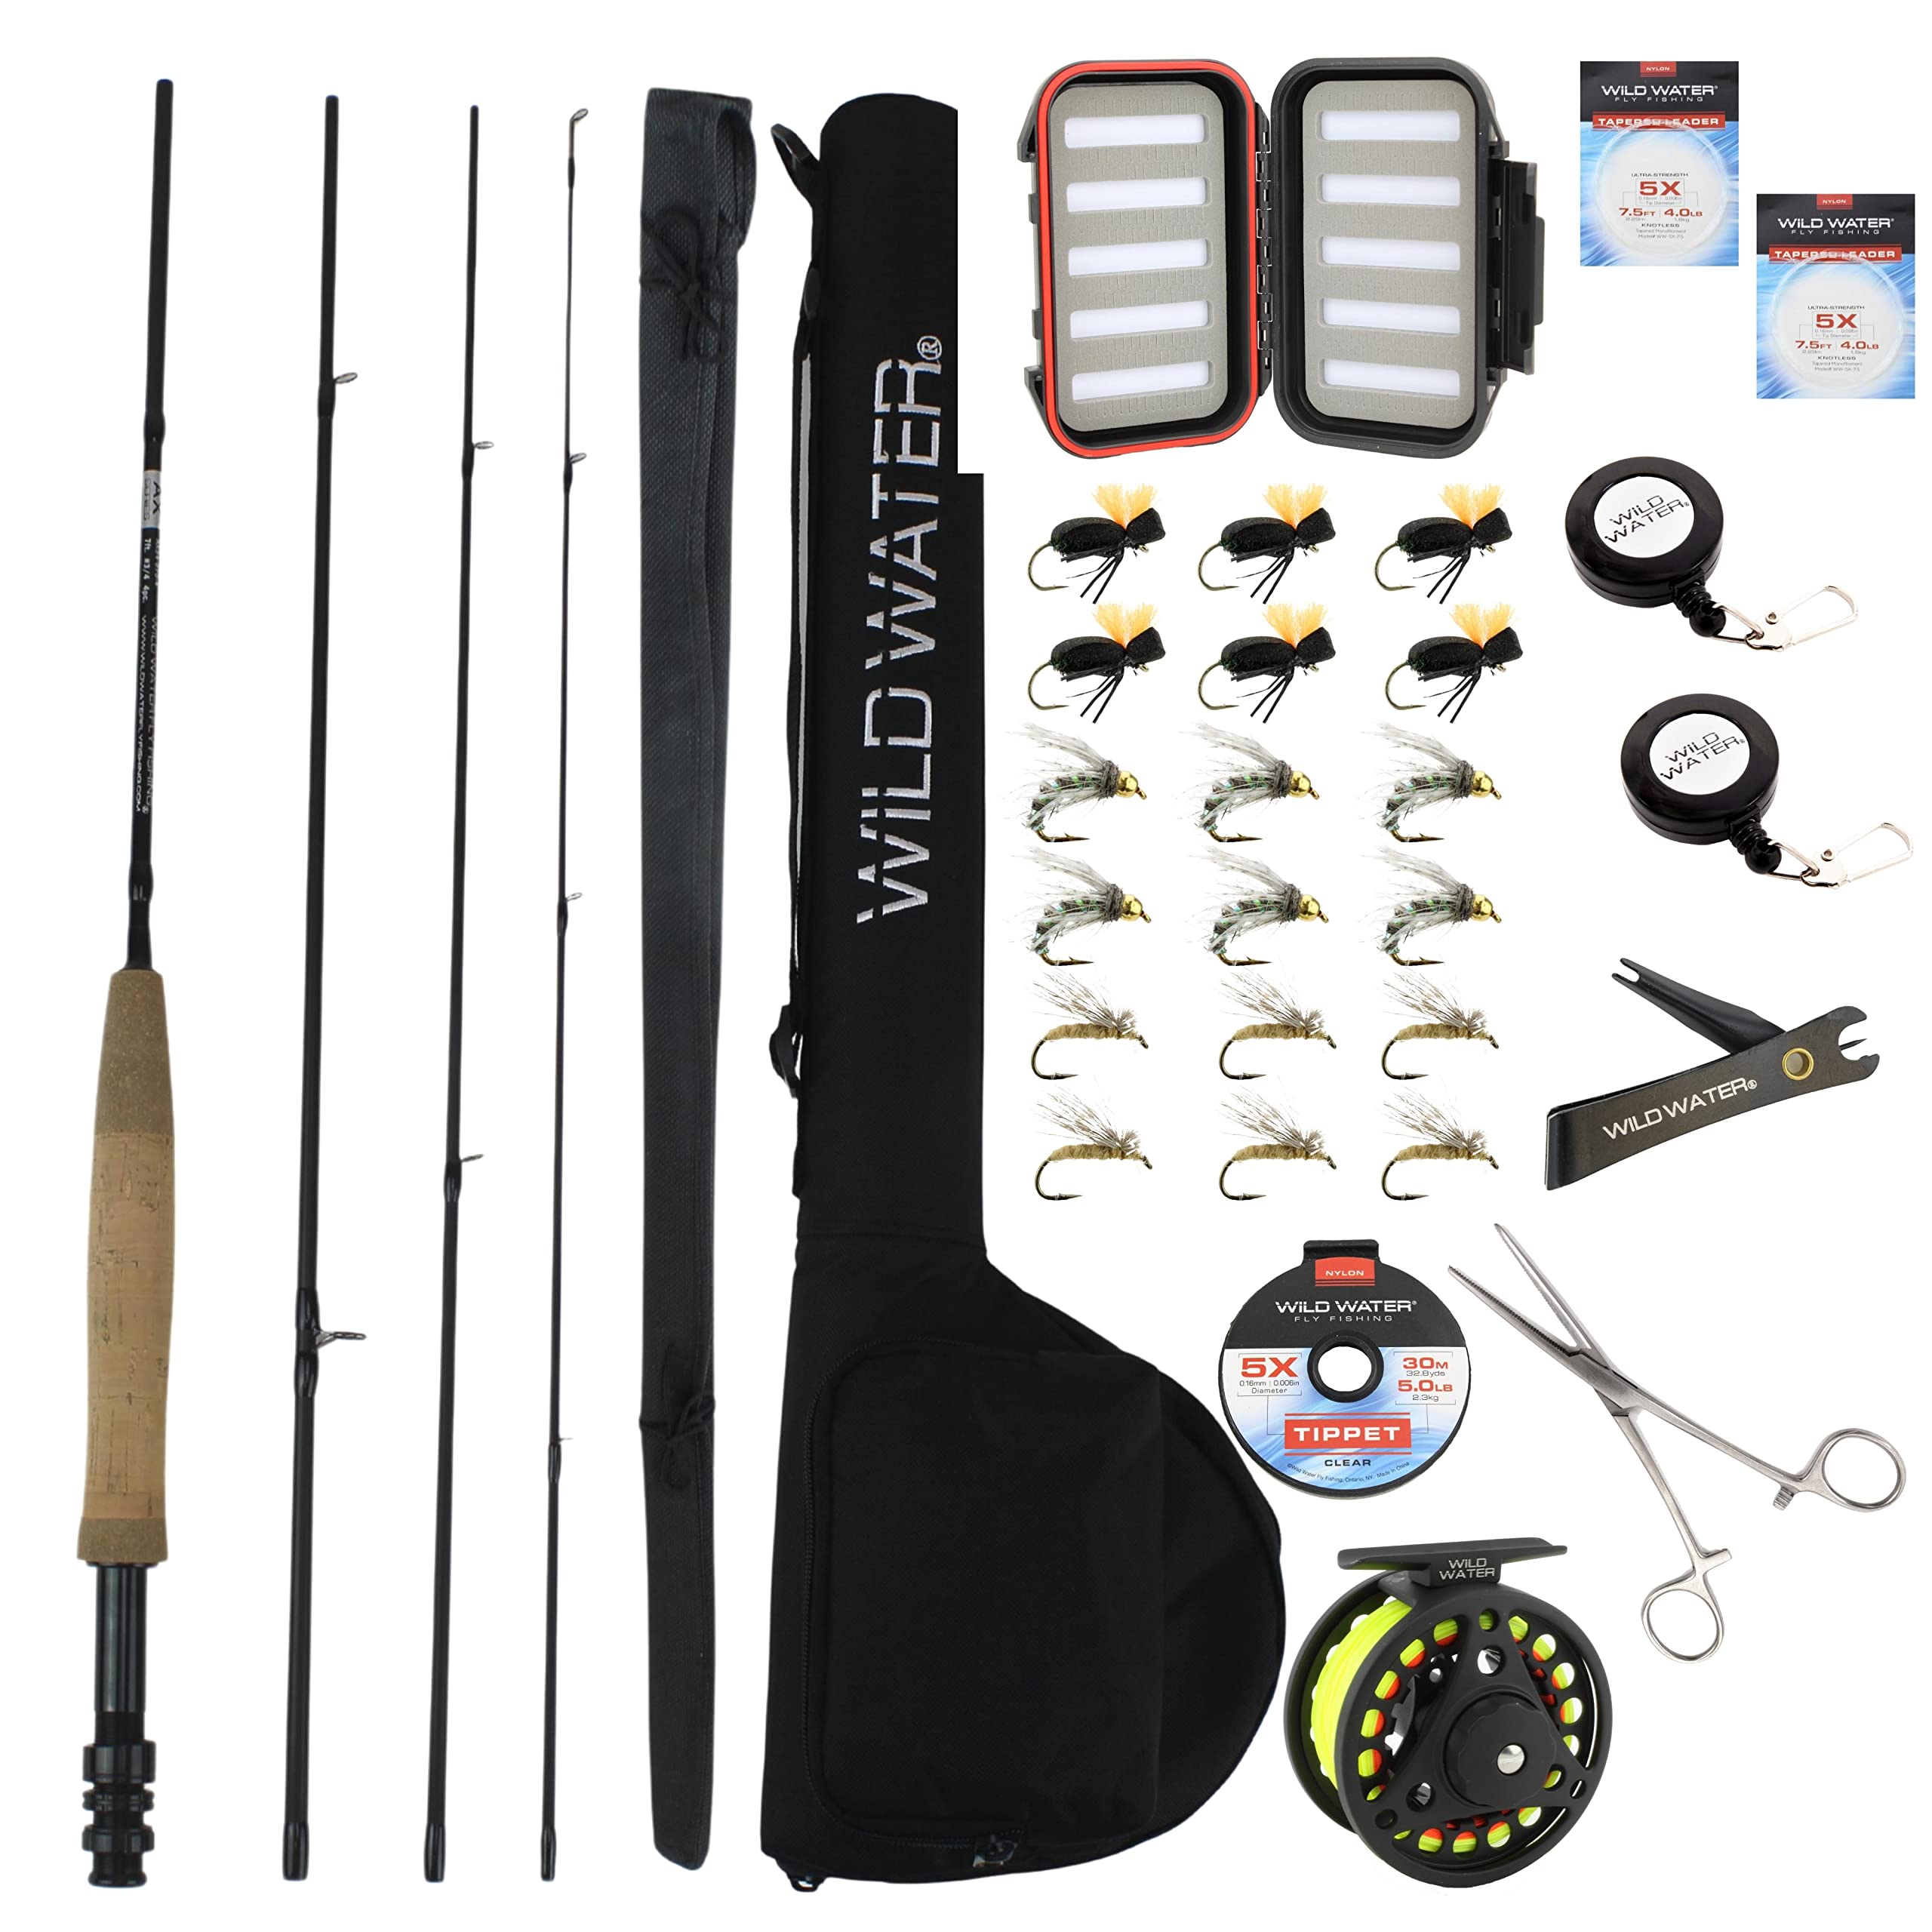 Wild Water Deluxe Fly Fishing Combo Starter Kit, 7-Foot Pole, 4-Piece Fly  Rod Kit, 3/4 Weight, Fishing Accessories, Includes Die cast Aluminum Reel  and Hard Tube Case with Pouch, Fly Box and